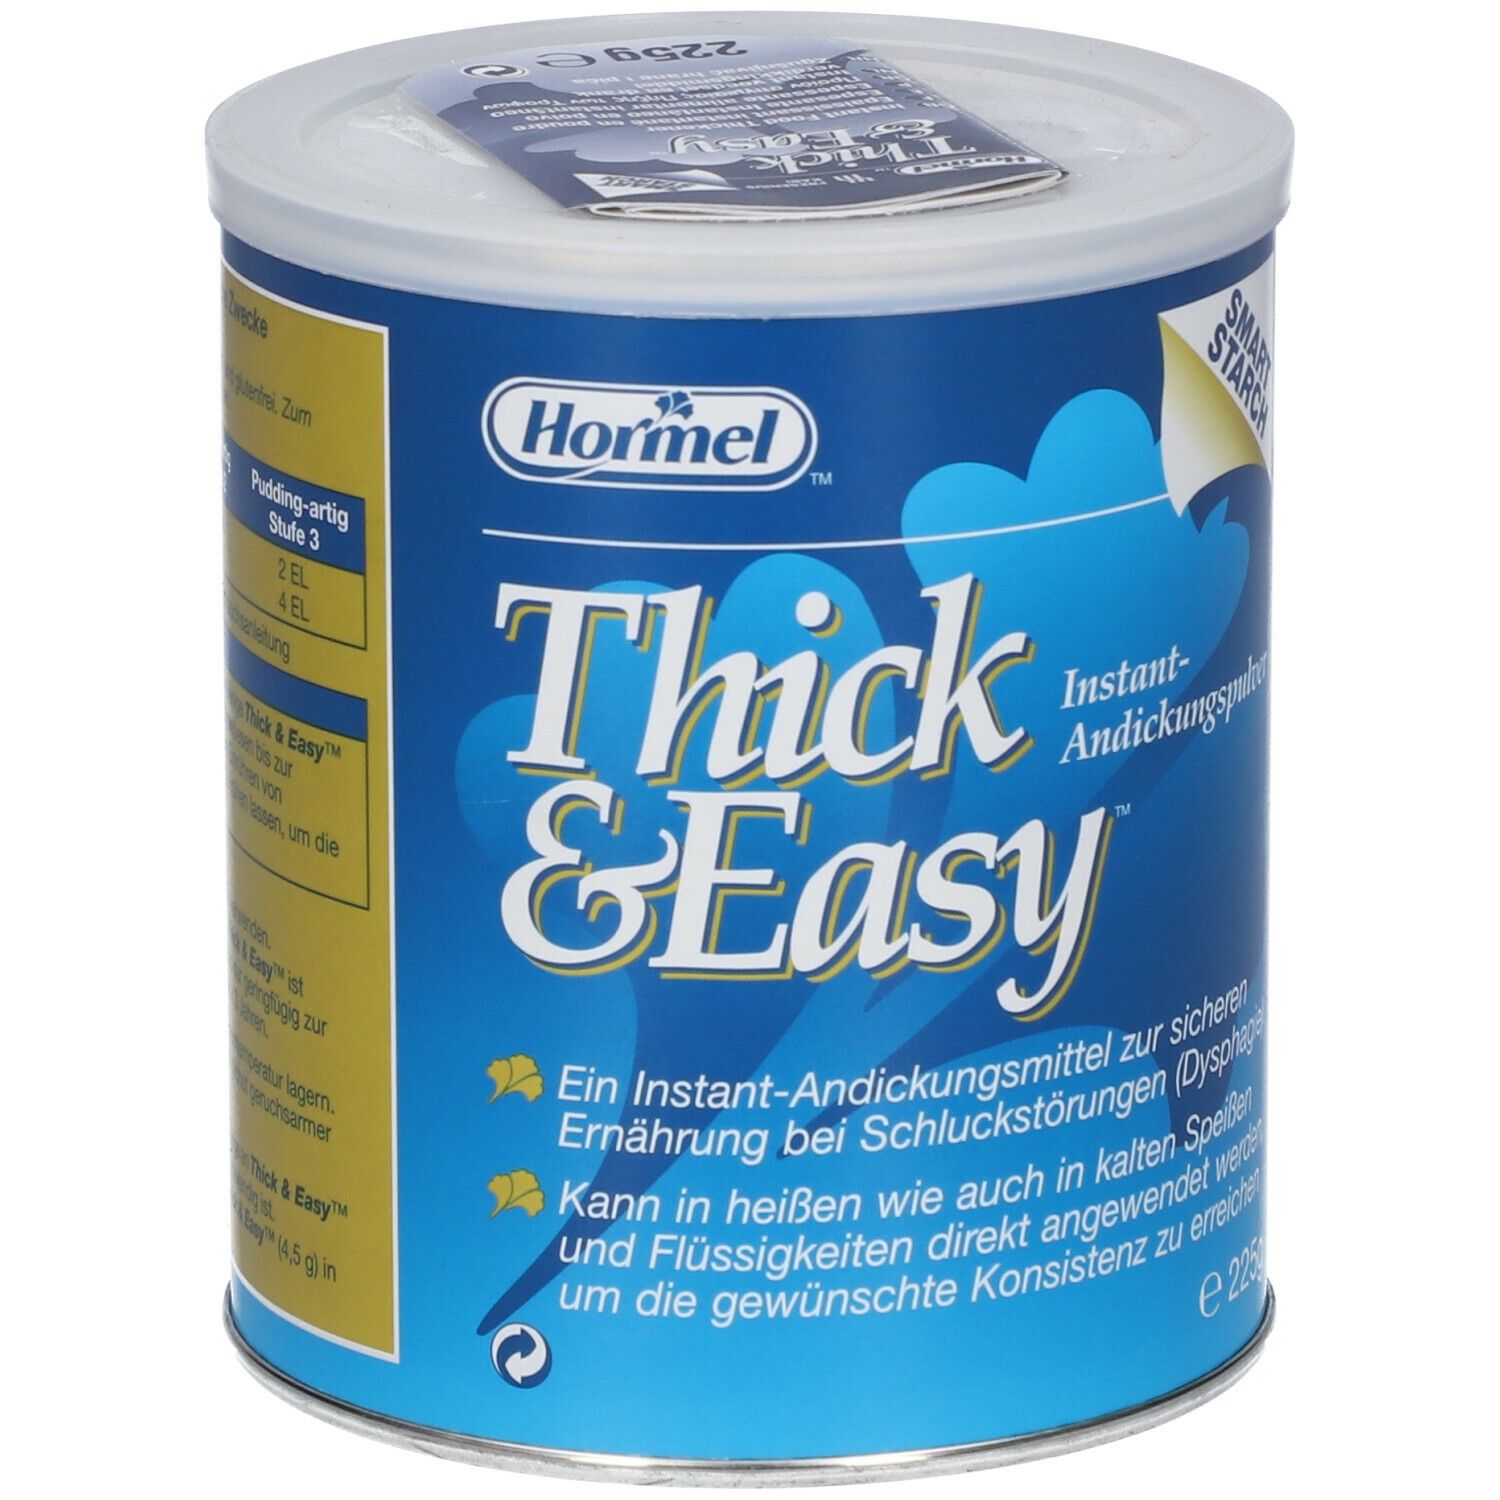 Thick & Easy™